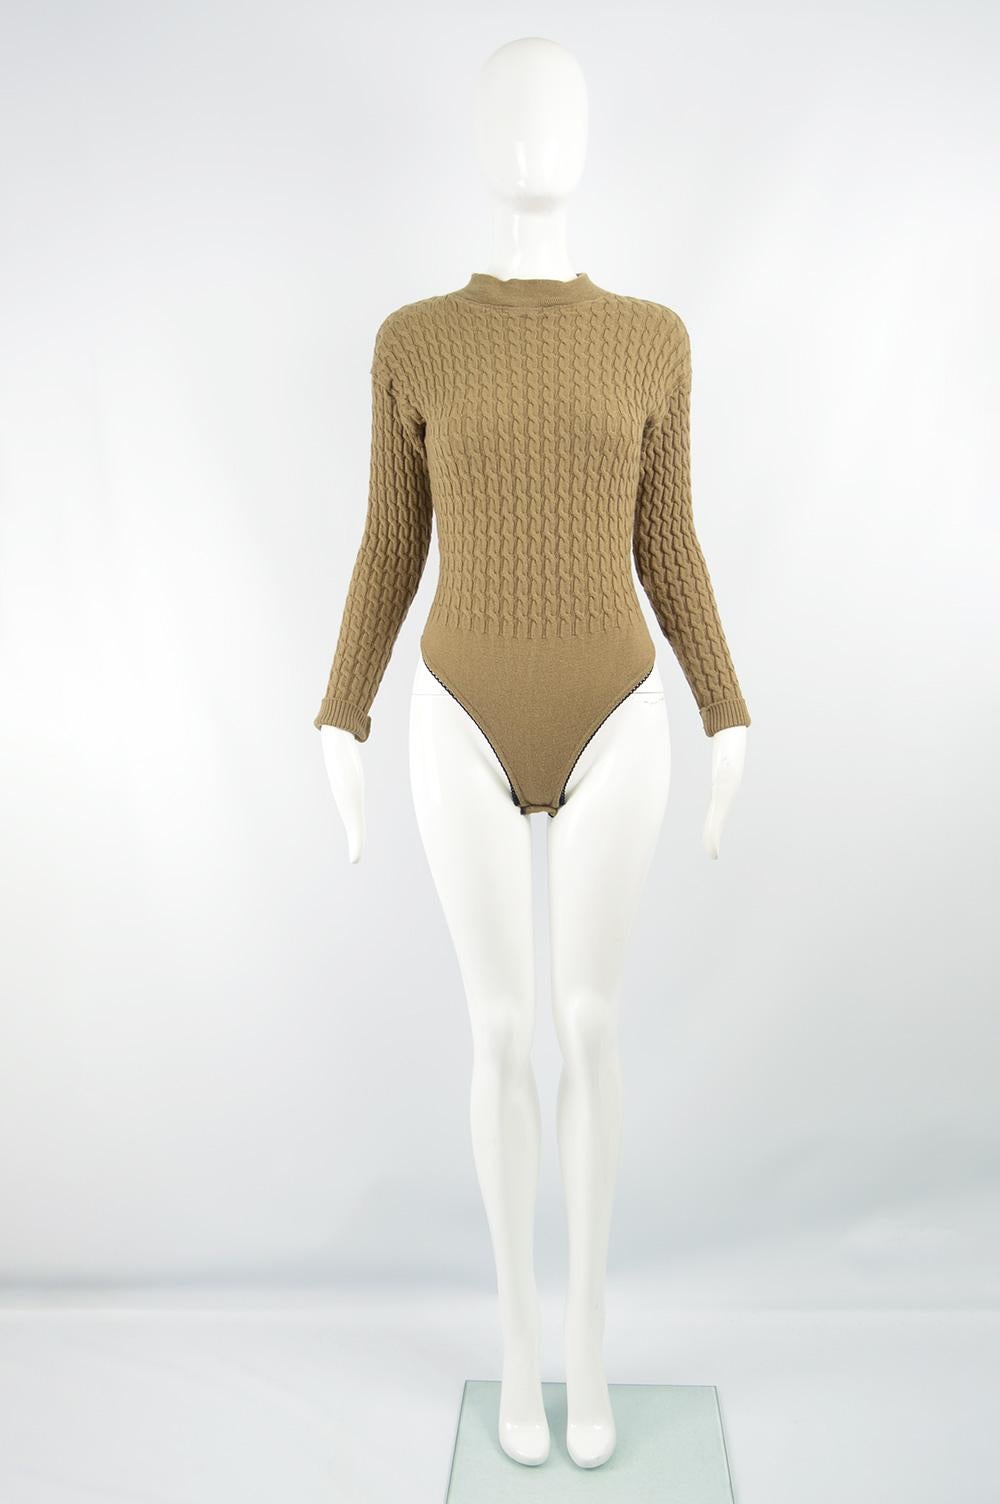 A chic vintage women's bodysuit from the 90s by luxury British fashion label, Joseph for the highly collectable Tricot line. In a brown wool chain cable knit with a mock neck and turn back cuffs. 

Size: Marked M but also fits Small. Please check